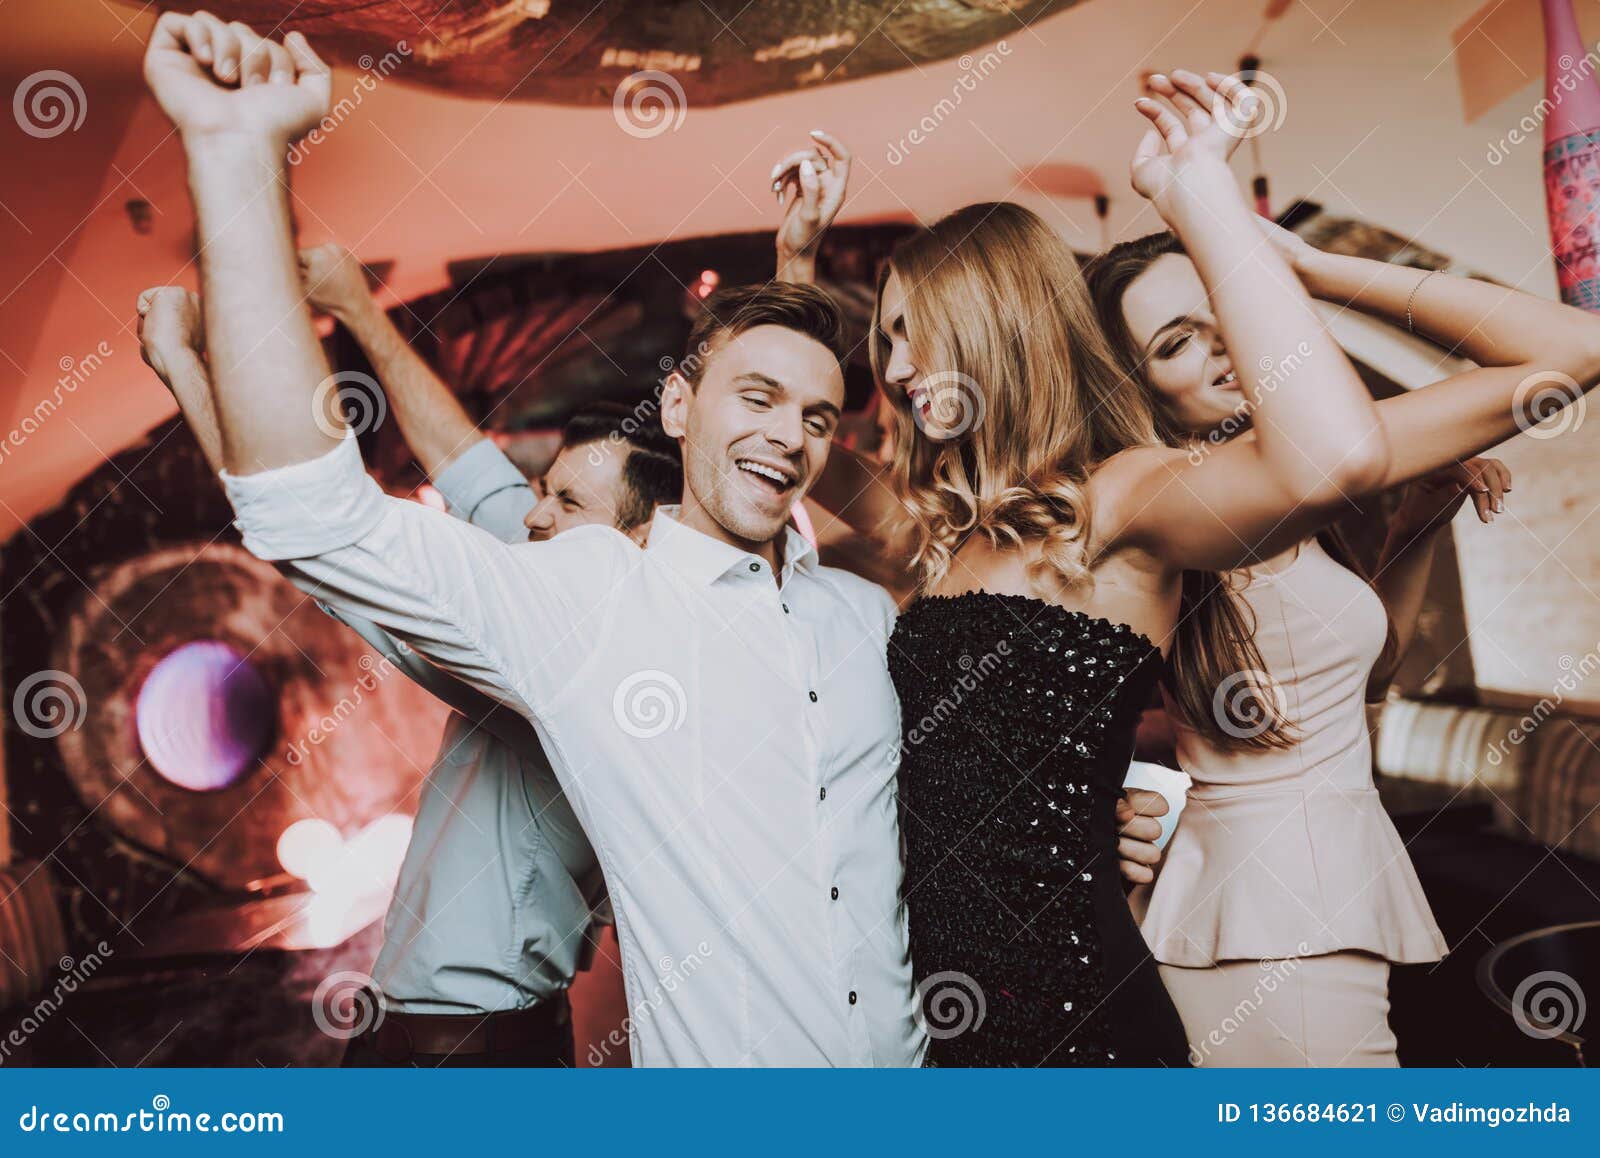 Man Dancing with Woman.Foreground.Singing Friends. Stock Image - Image ...